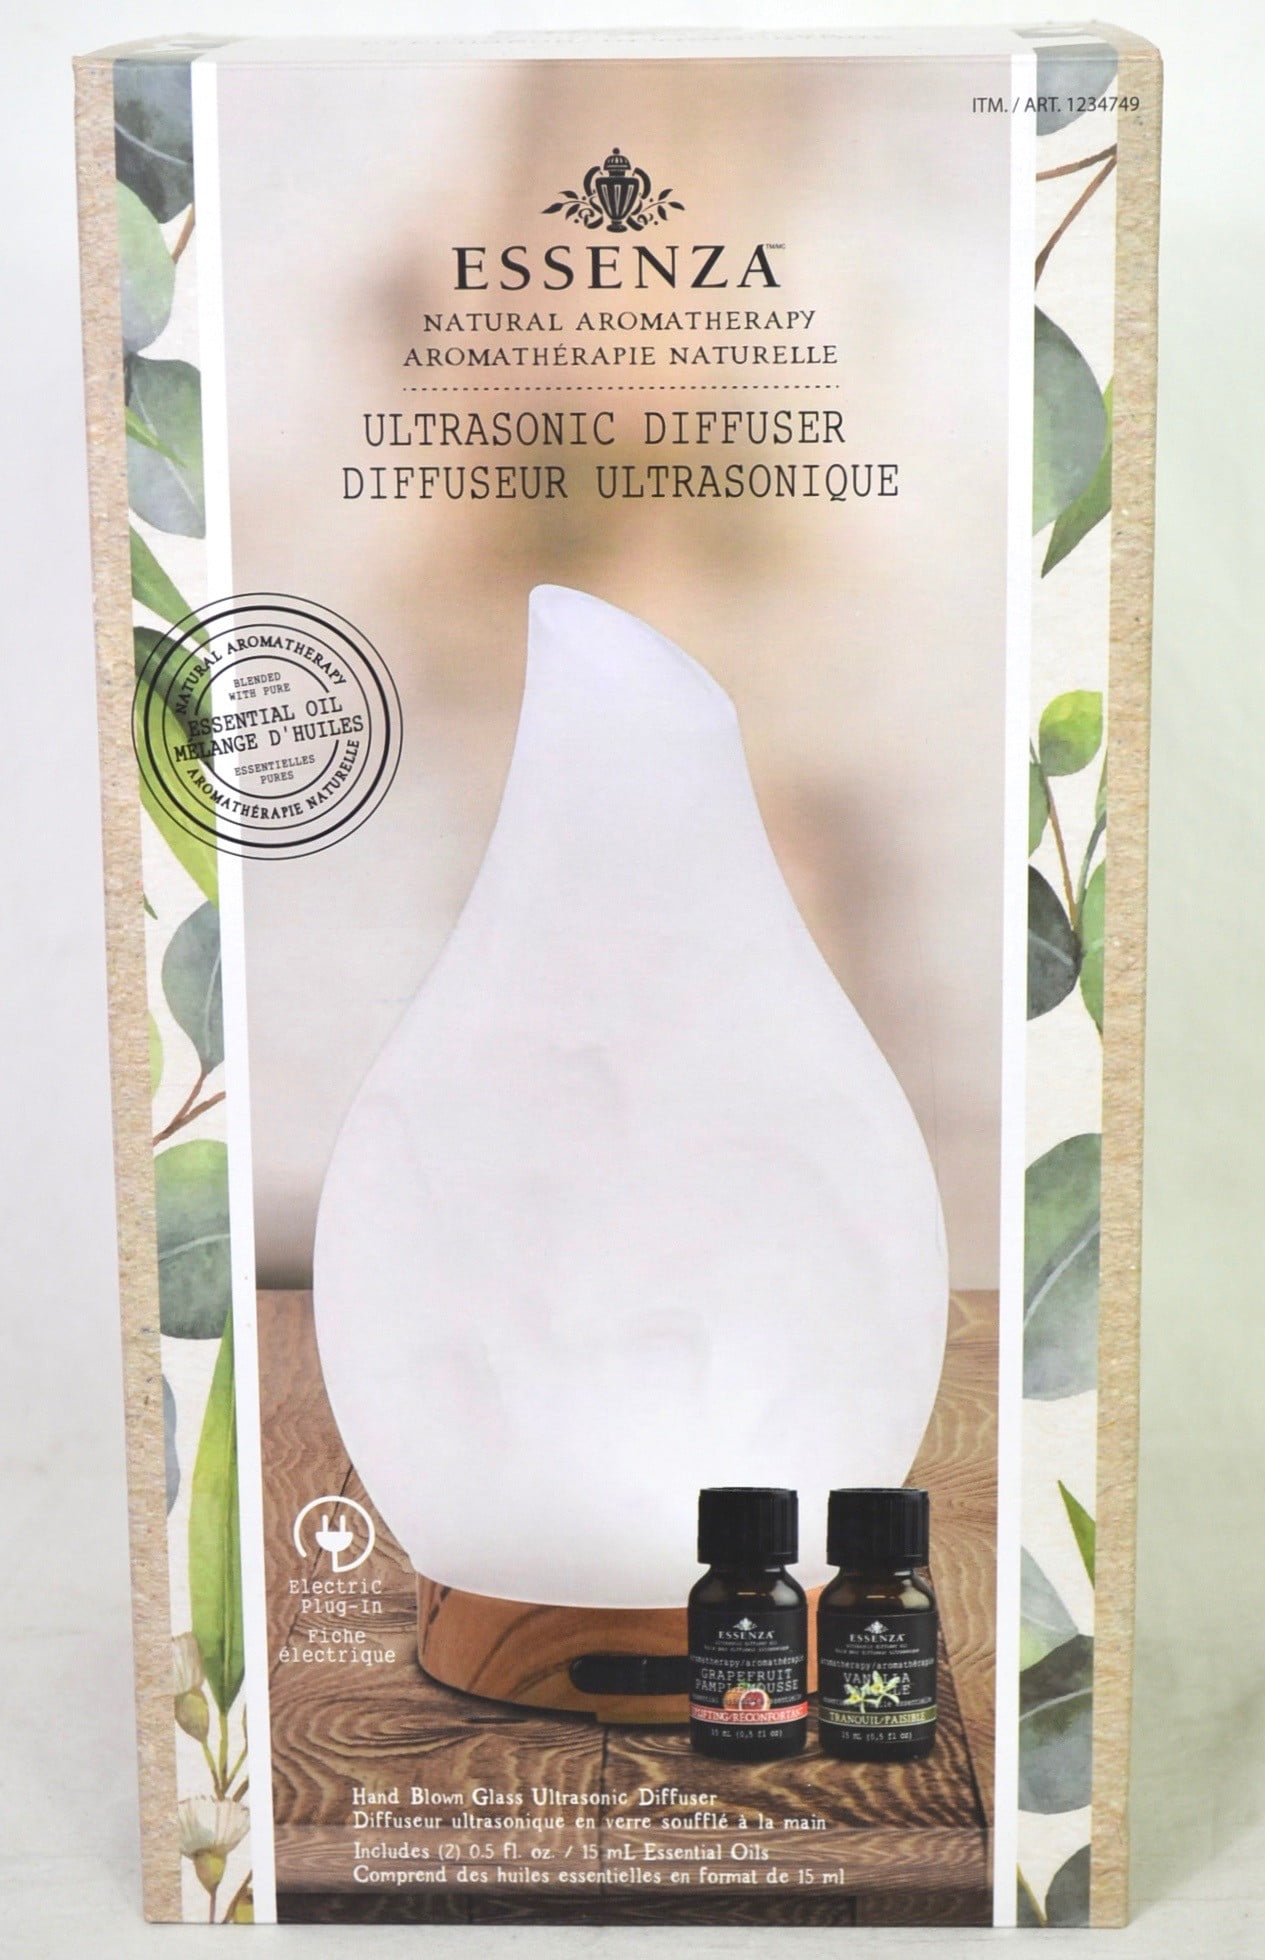 Includes 3 oils essenza ultrasonic diffuser with auto-timer Open box product 